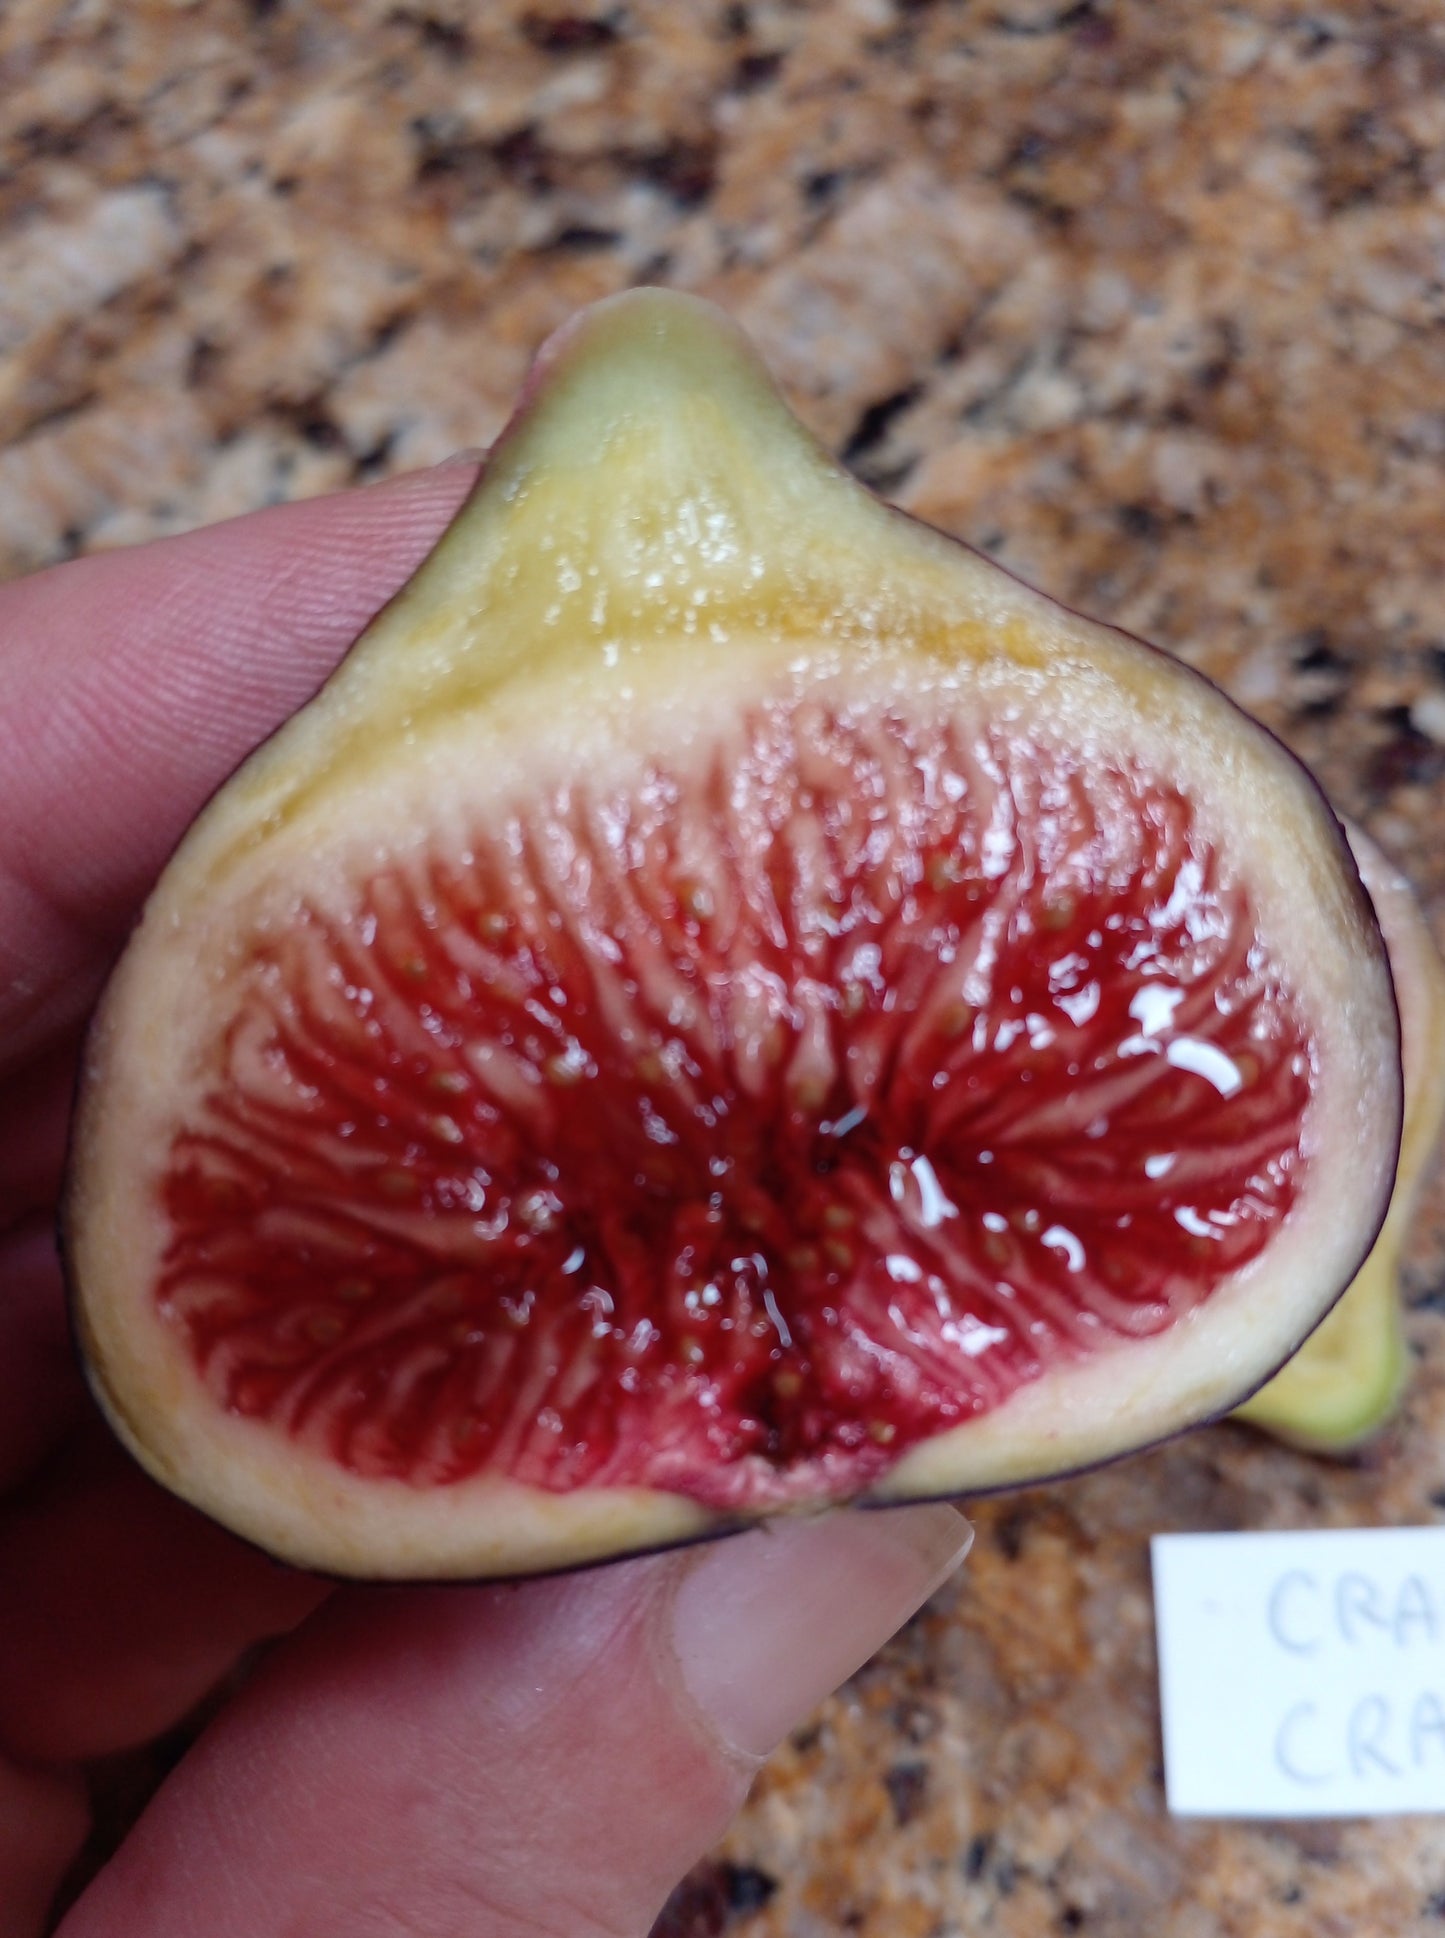 Craven's Craving Fig - 2 Cuttings - Purple Figs with a Rich Berry Flavor